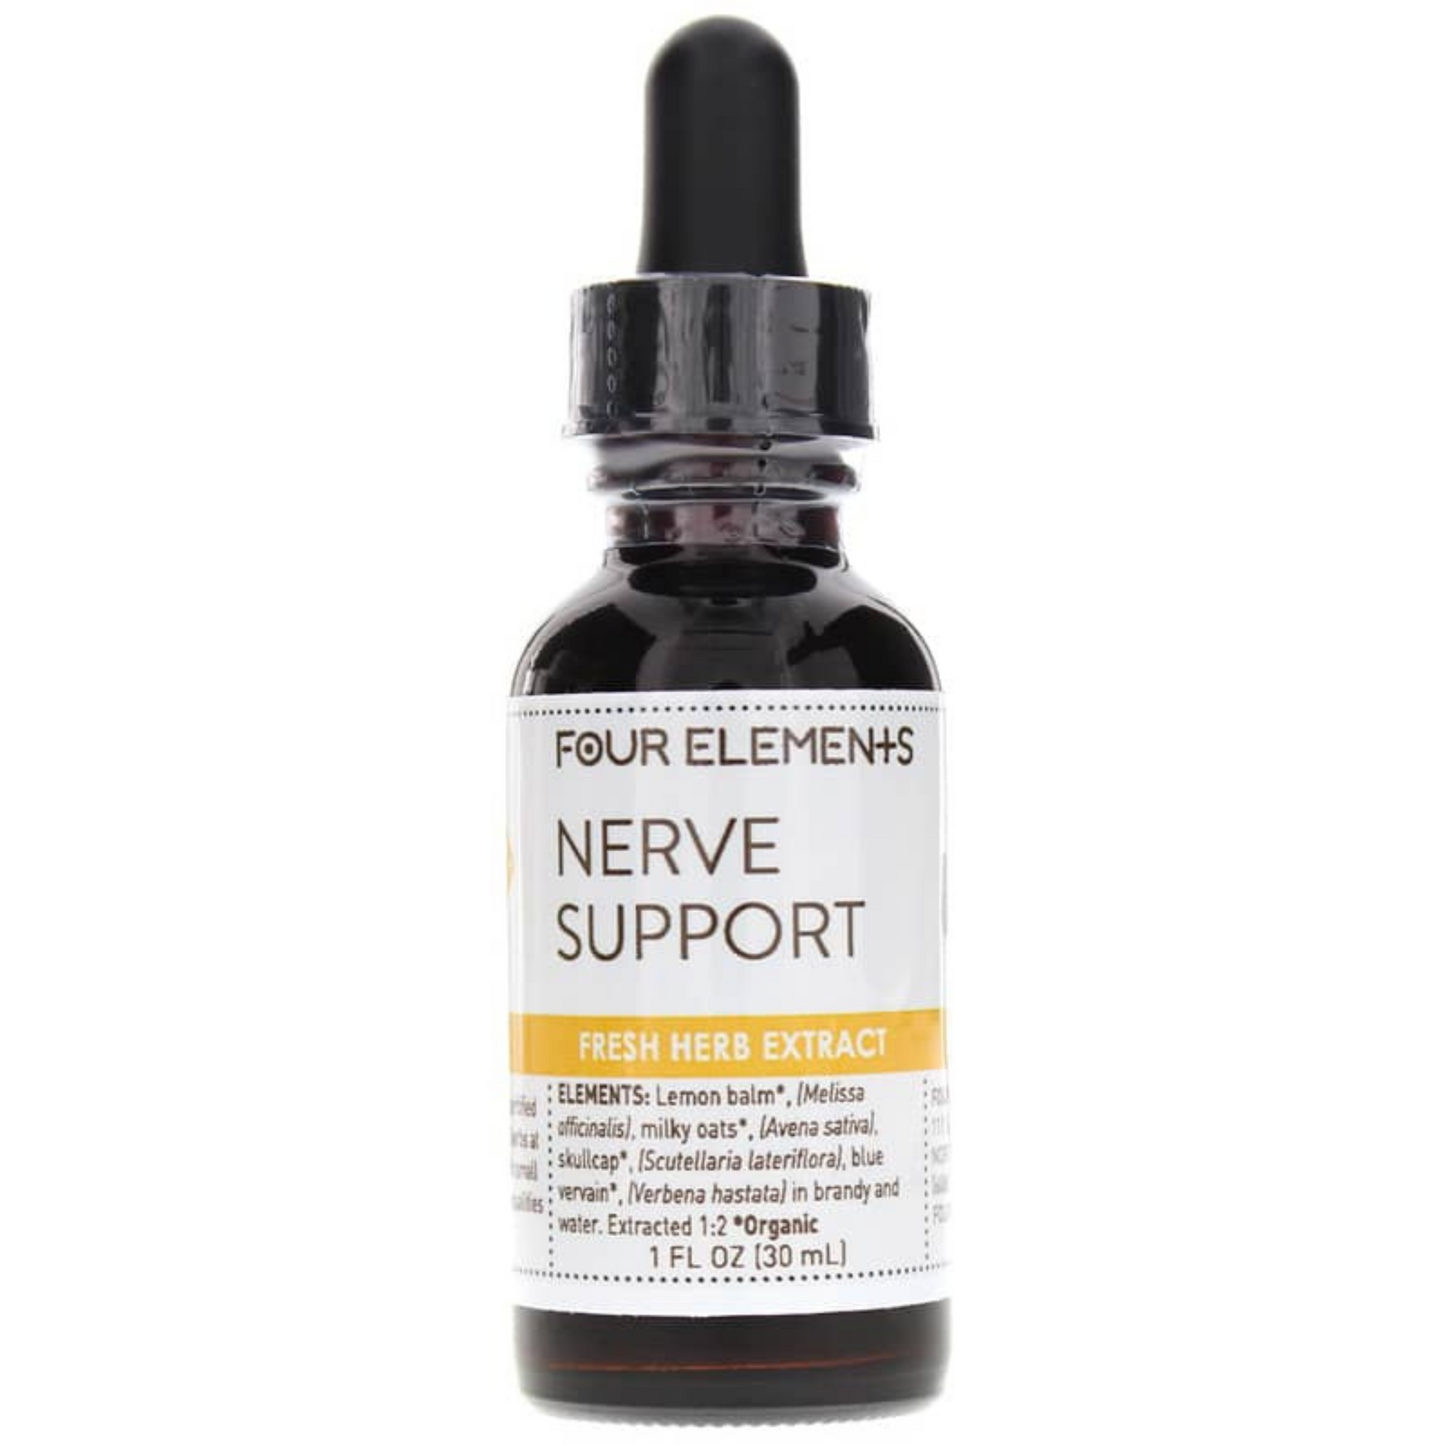 Primary Image of Four Elements Nerve Support Tincture (1 fl oz)